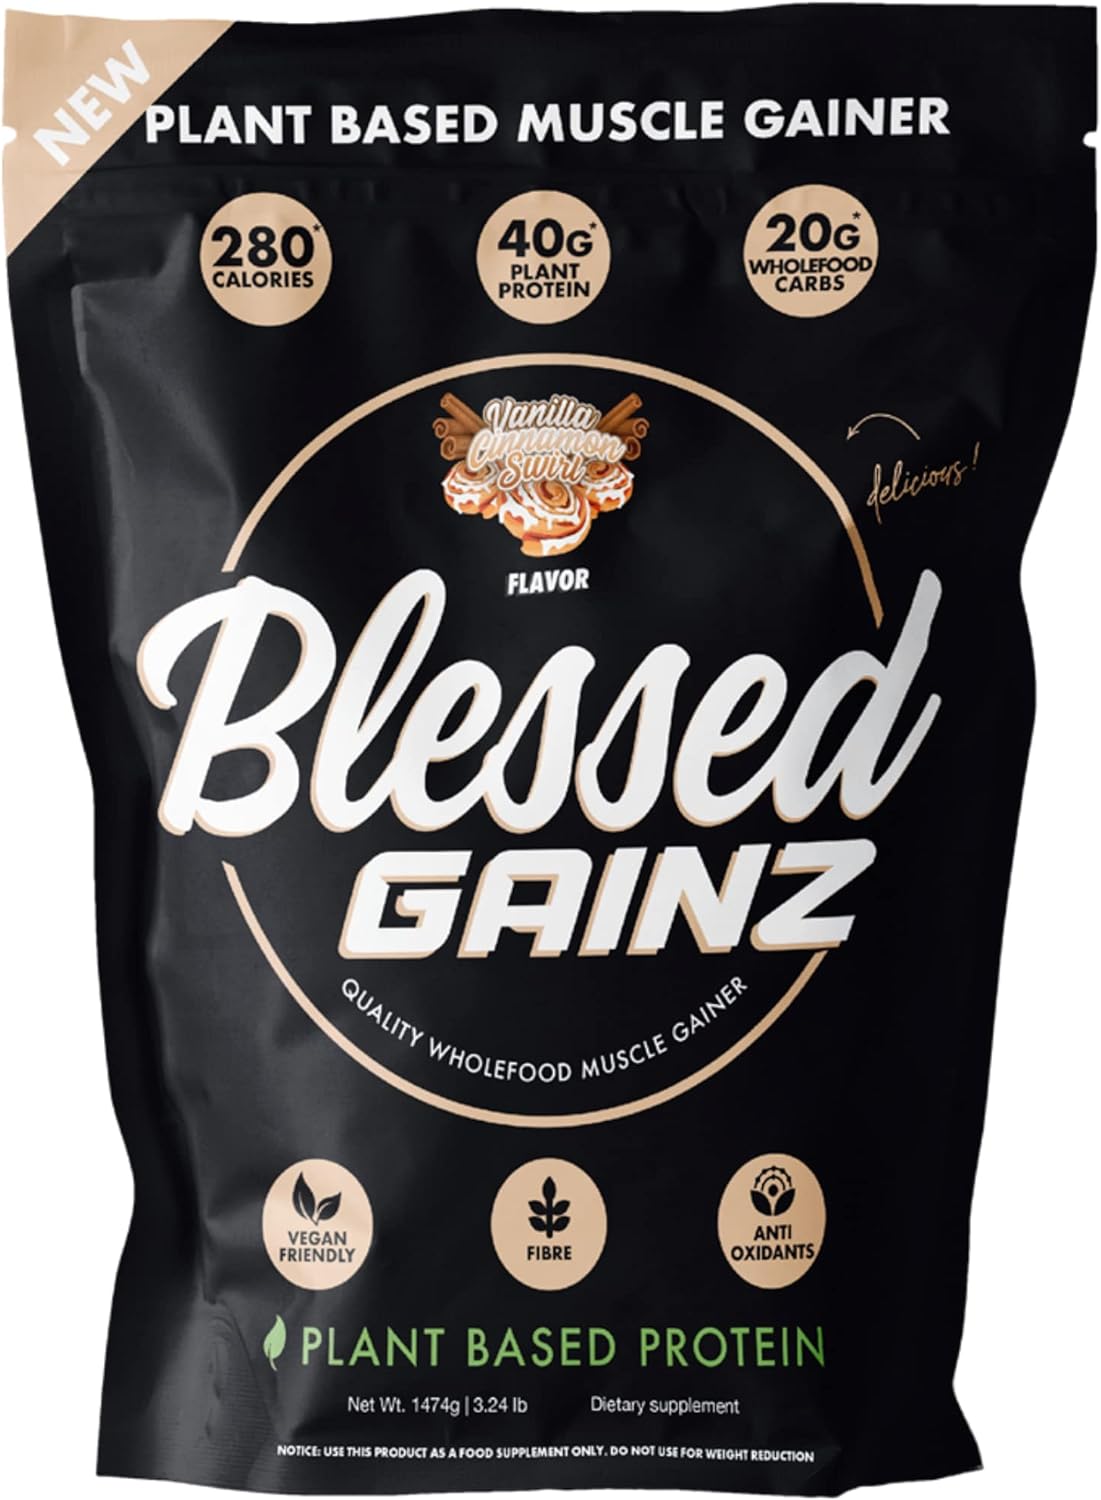 BLESSED Gainz Vegan Protein Powder Mass Gainer - 40g Plant Based Prote